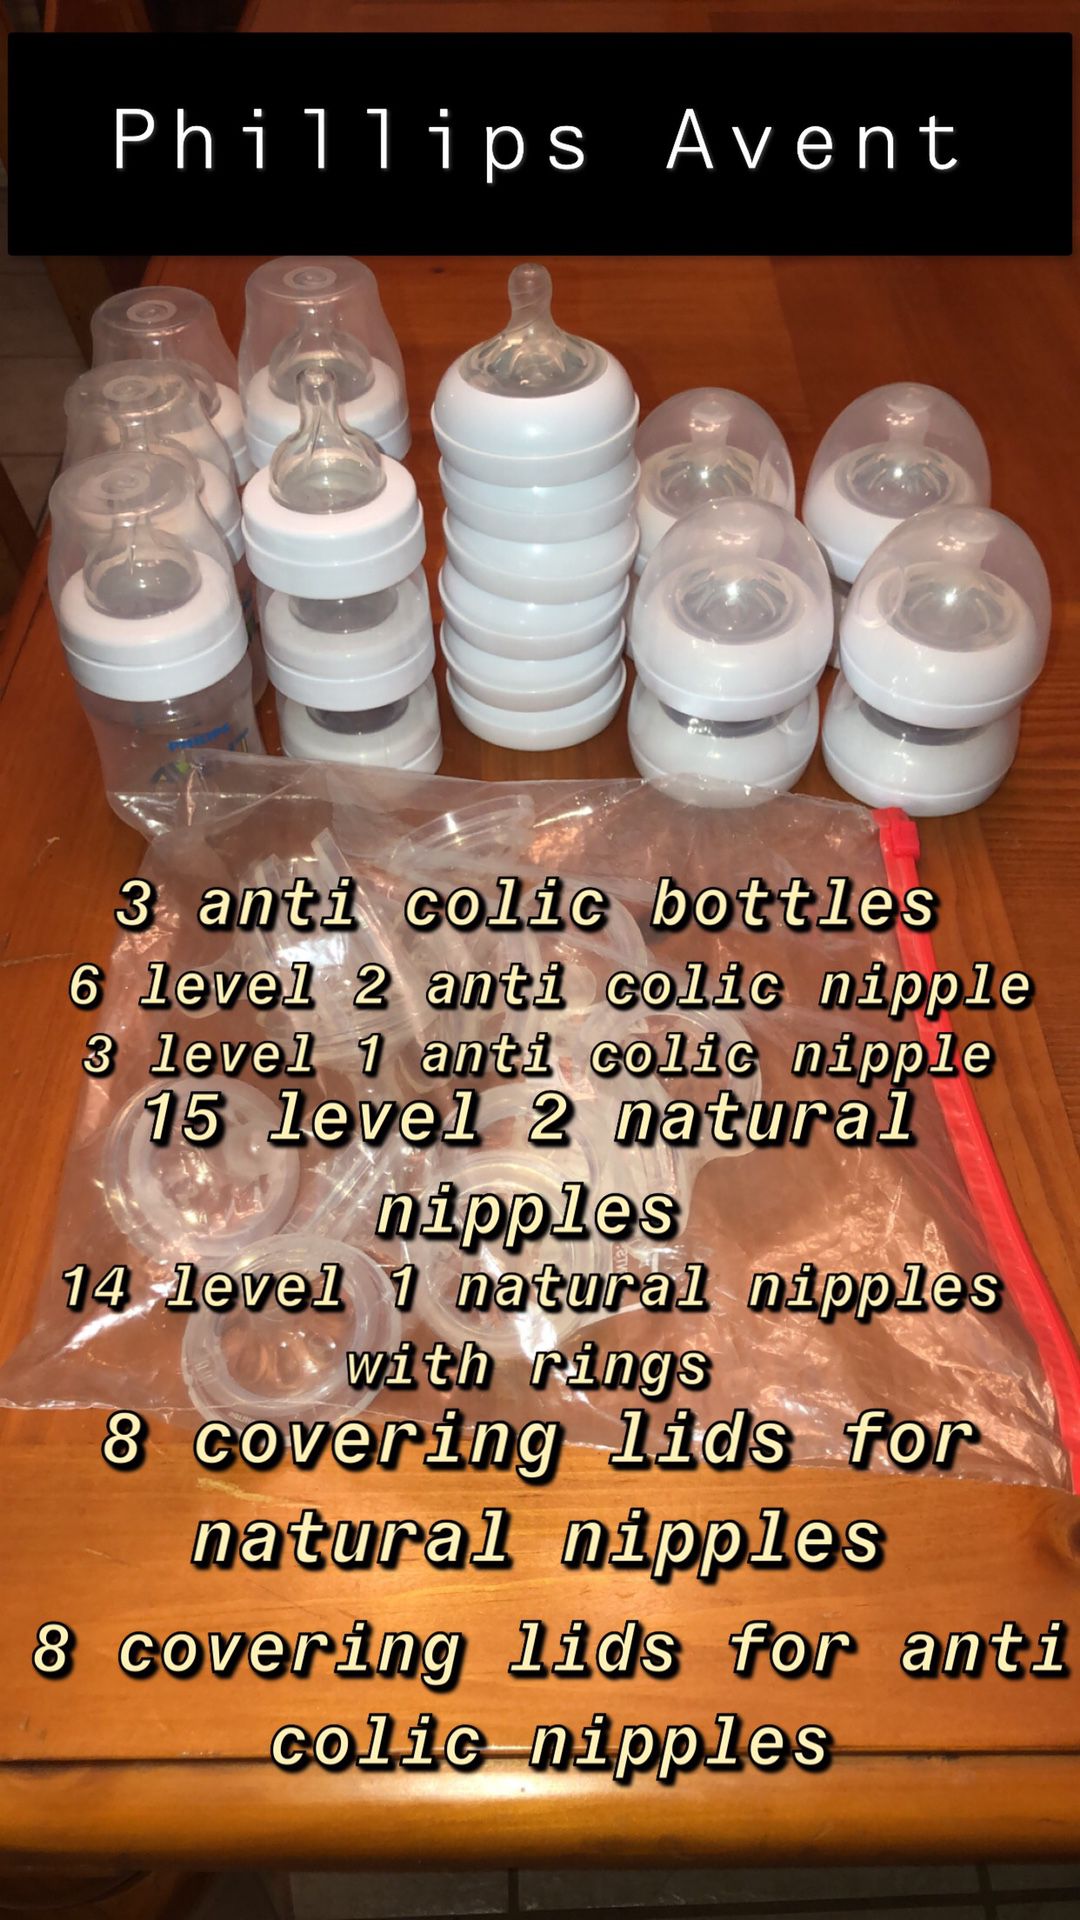 Avent bottles and nipples/ car seat cover